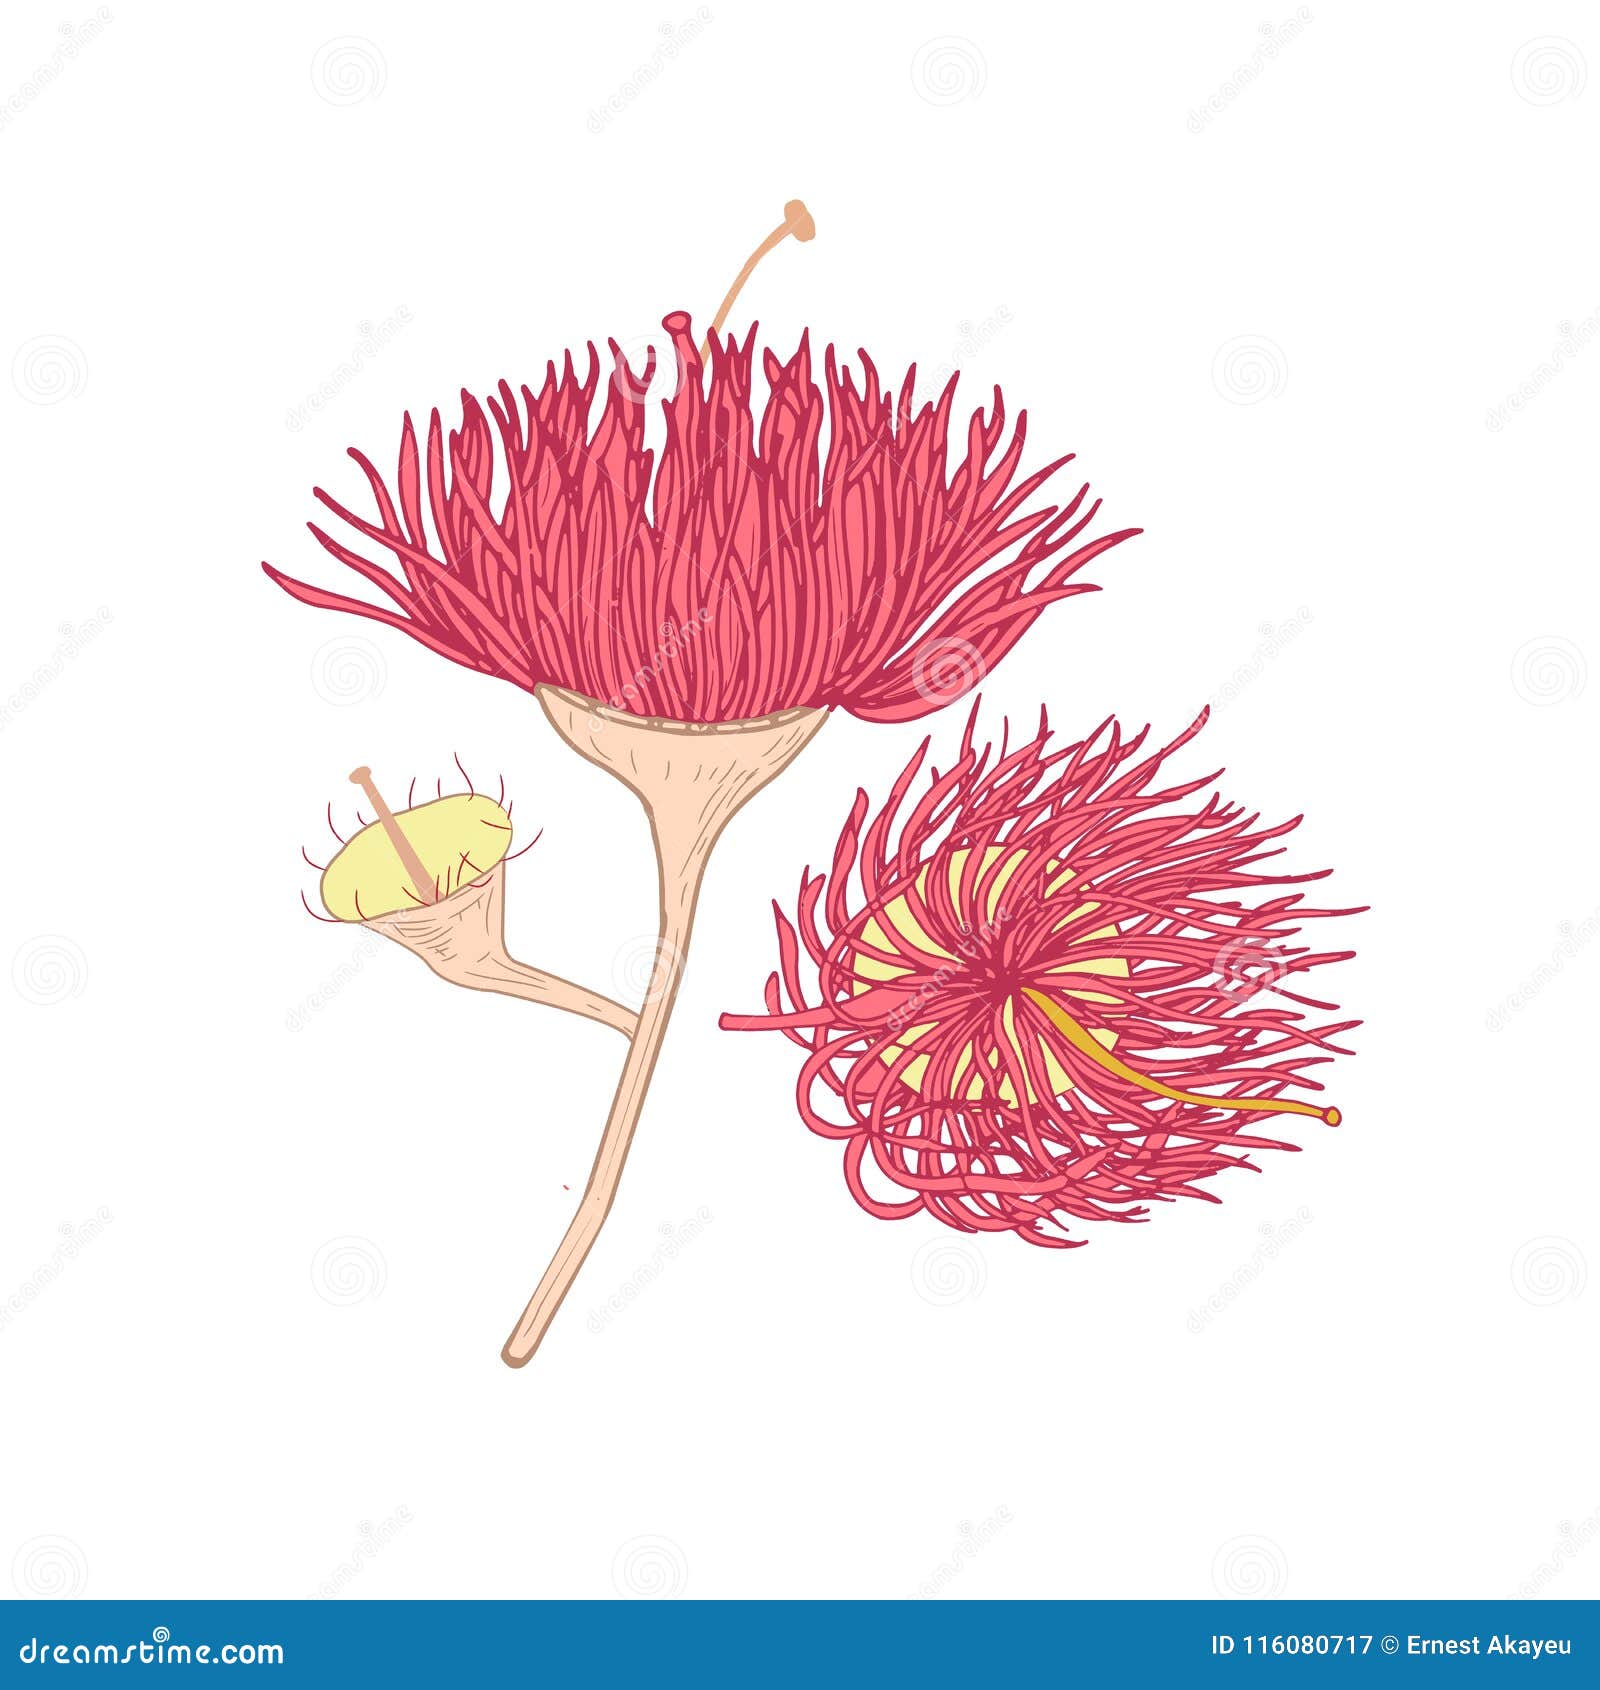 eucalyptus pink blooming flower hand drawn on white background. botanical drawing of part of plant used in floristry and